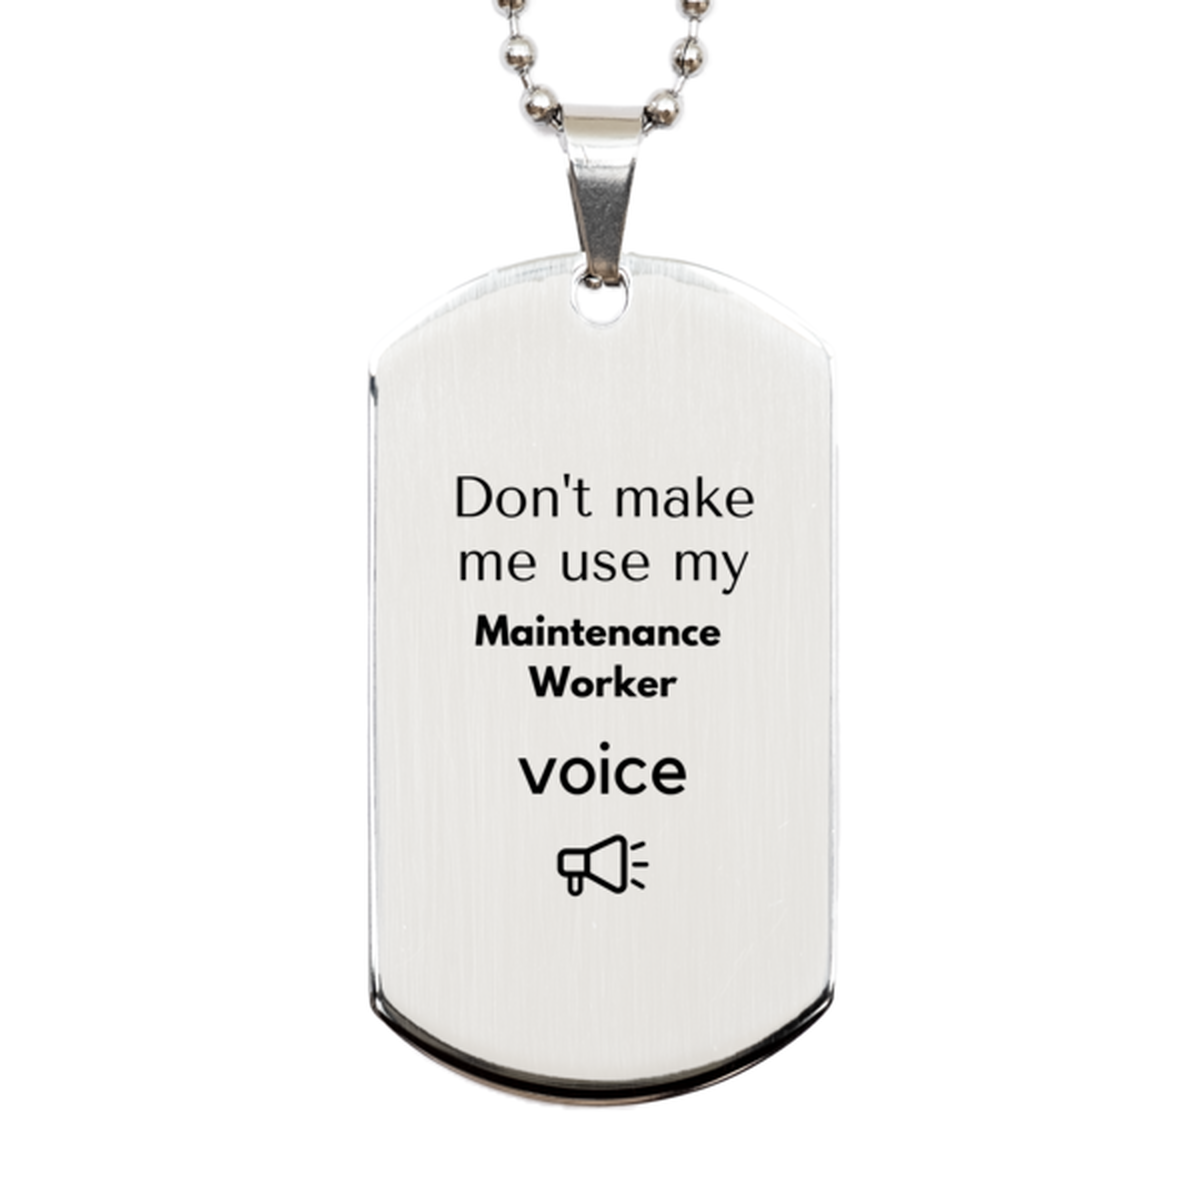 Don't make me use my Maintenance Worker voice, Sarcasm Maintenance Worker Gifts, Christmas Maintenance Worker Silver Dog Tag Birthday Unique Gifts For Maintenance Worker Coworkers, Men, Women, Colleague, Friends